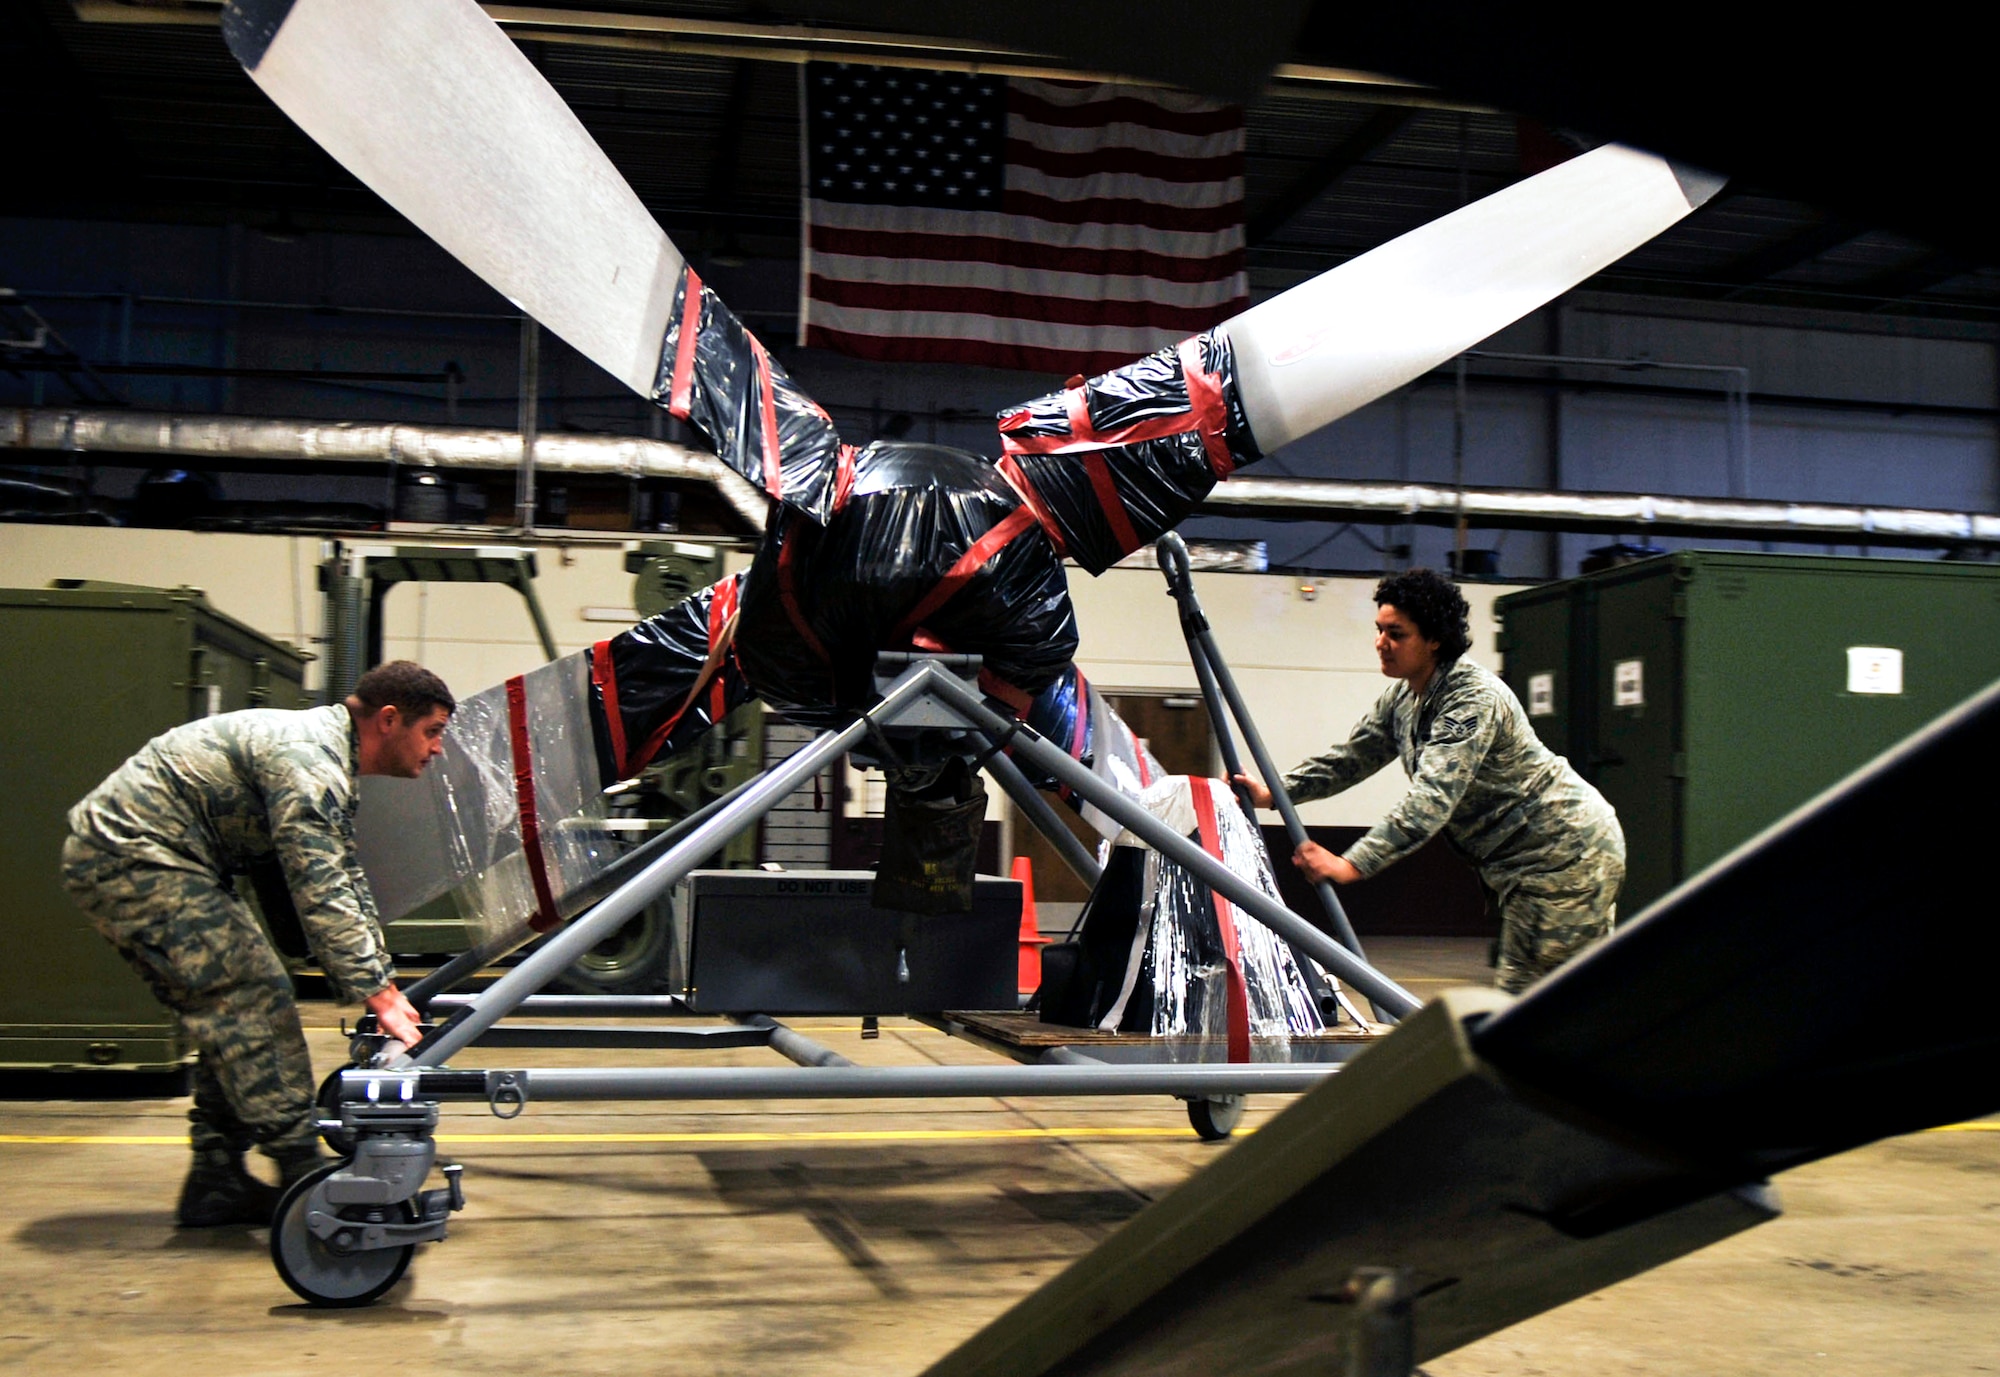 Senior Airman Nathan Pile, a 19th Logistics Readiness Squadron mobility readiness spares packages journeyman, and Senior Airman Shantwanique Harris, a 19th Logistics Readiness Squadron mobility readiness spares packages journeyman, move a propeller March 12, 2015, at Little Rock Air Force Base, Ark. A single propeller costs approximately $600,000.  (U.S. Air Force photo by Senior Airman Stephanie Serrano) 